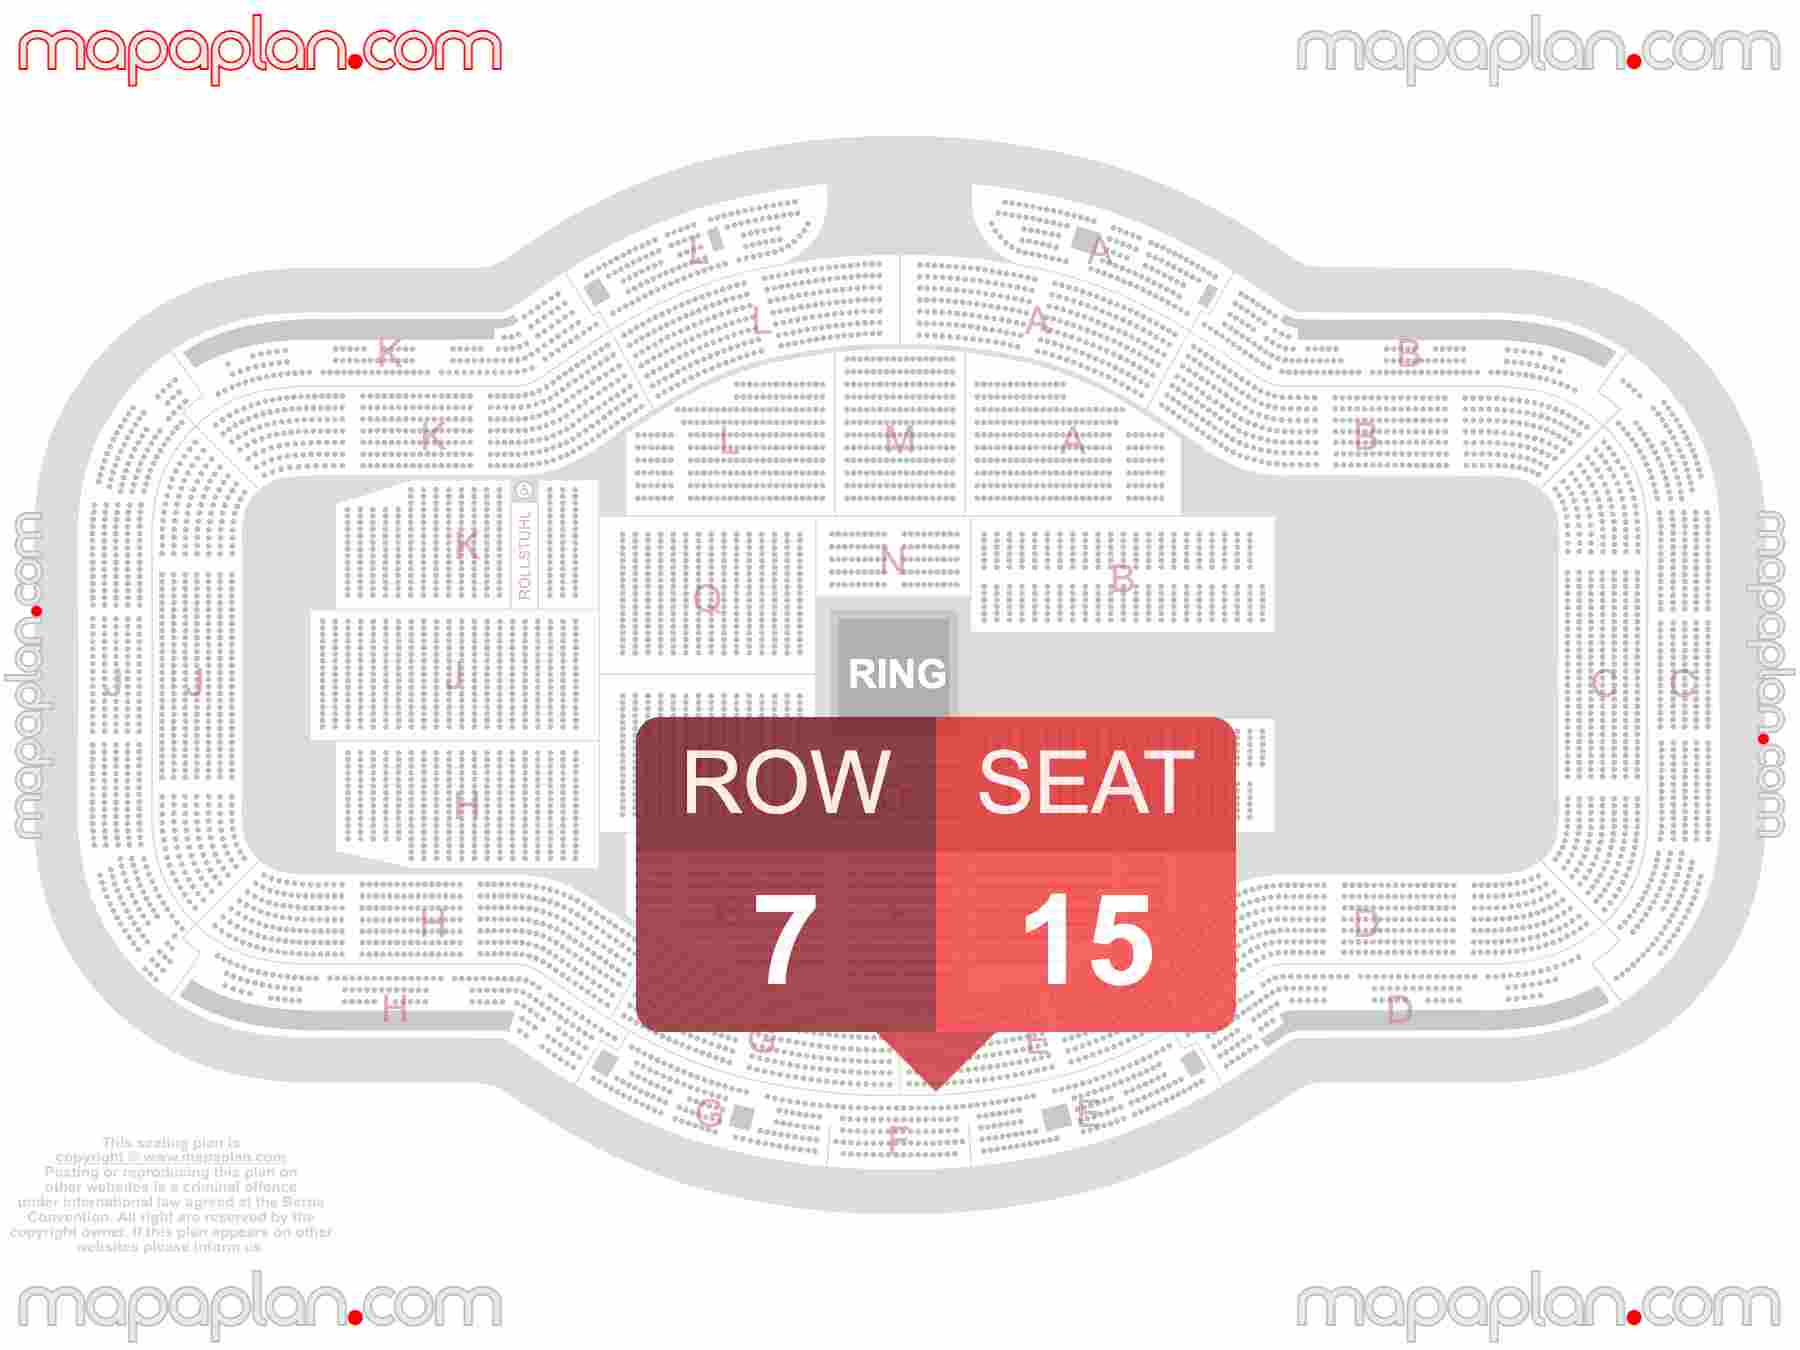 Frankfurt am Main Festhalle seating plan WWE boxing MMA 360 in the round stage find best seats row numbering system map showing how many seats per row - Individual find my seat virtual locator